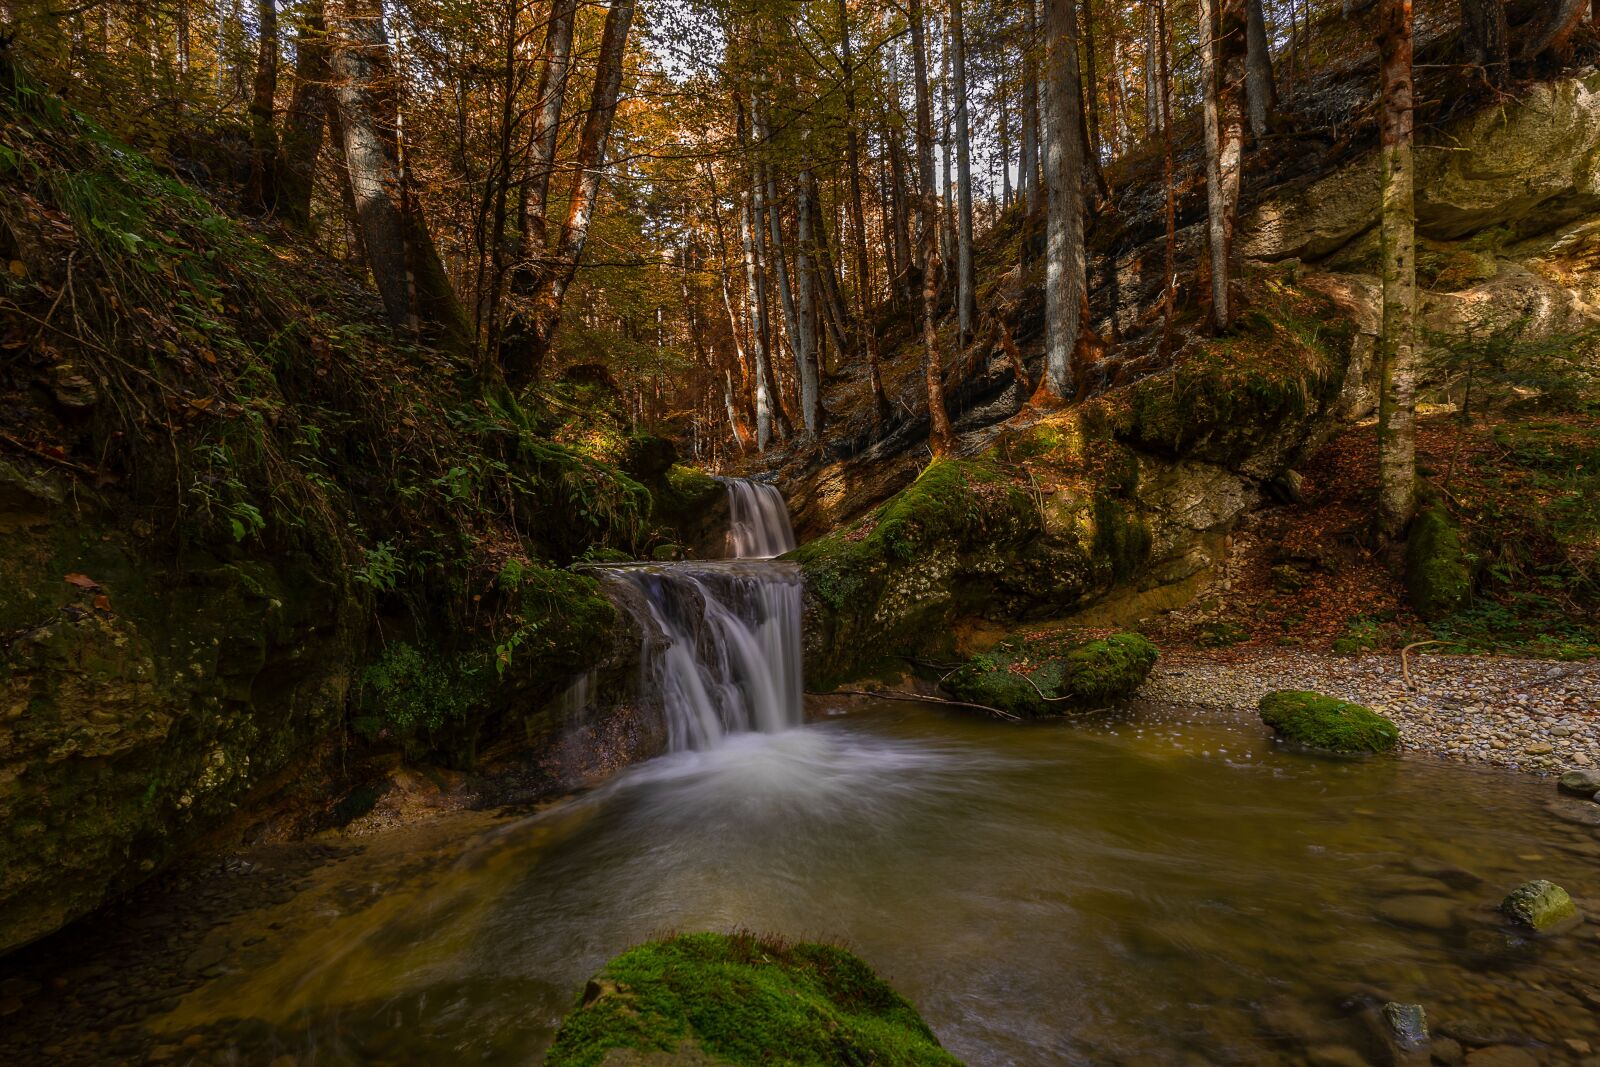 ZEISS Batis 18mm F2.8 sample photo. Nature, waterfall, landscape photography